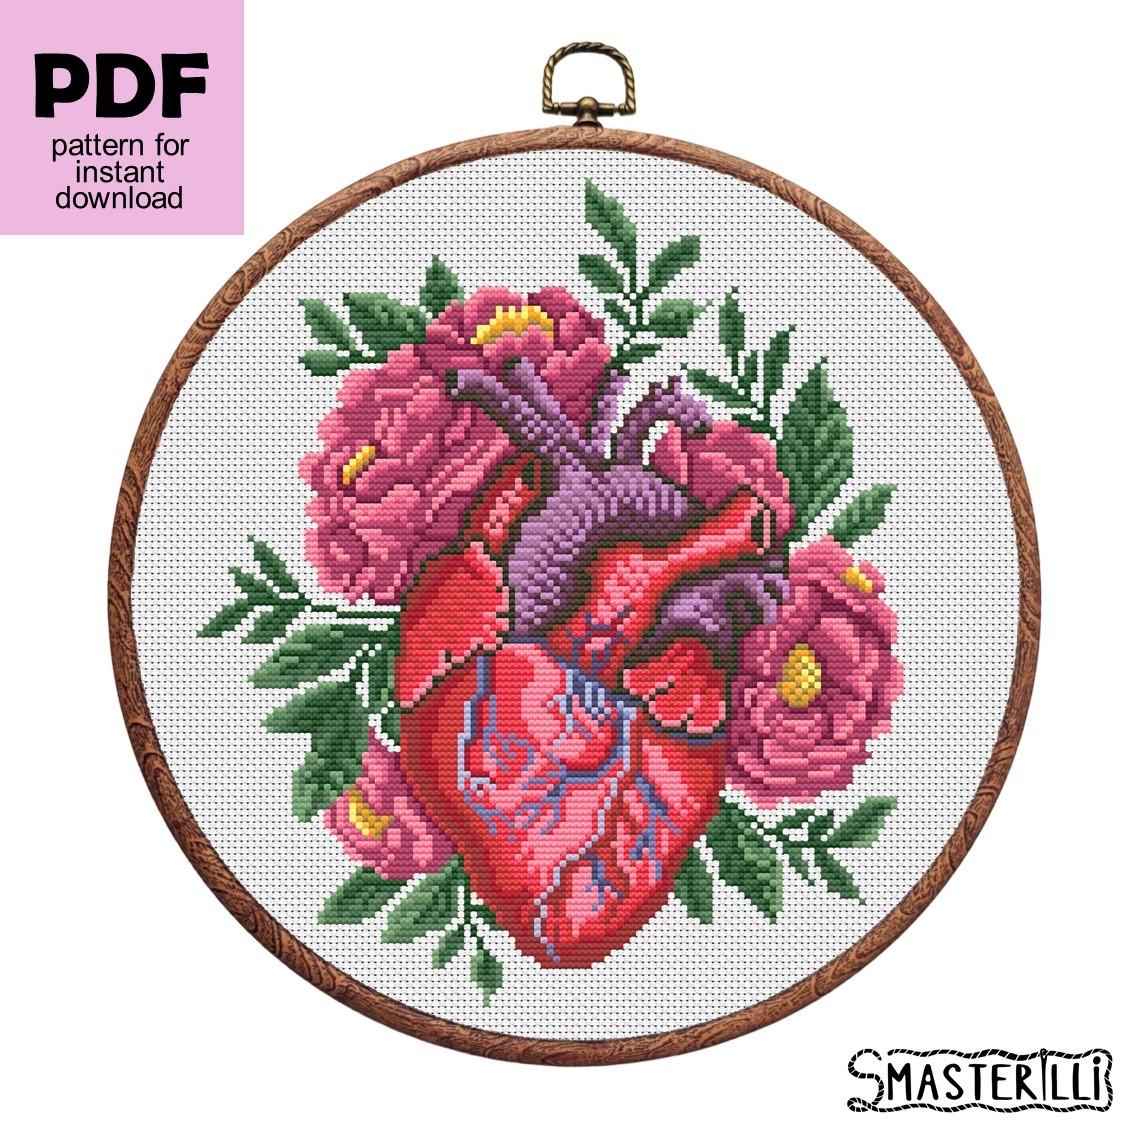 Anatomical heart cross stitch pattern with flowers and plants. Embroidery ornament by Smasterilli. Digital cross stitch pattern for instant download.